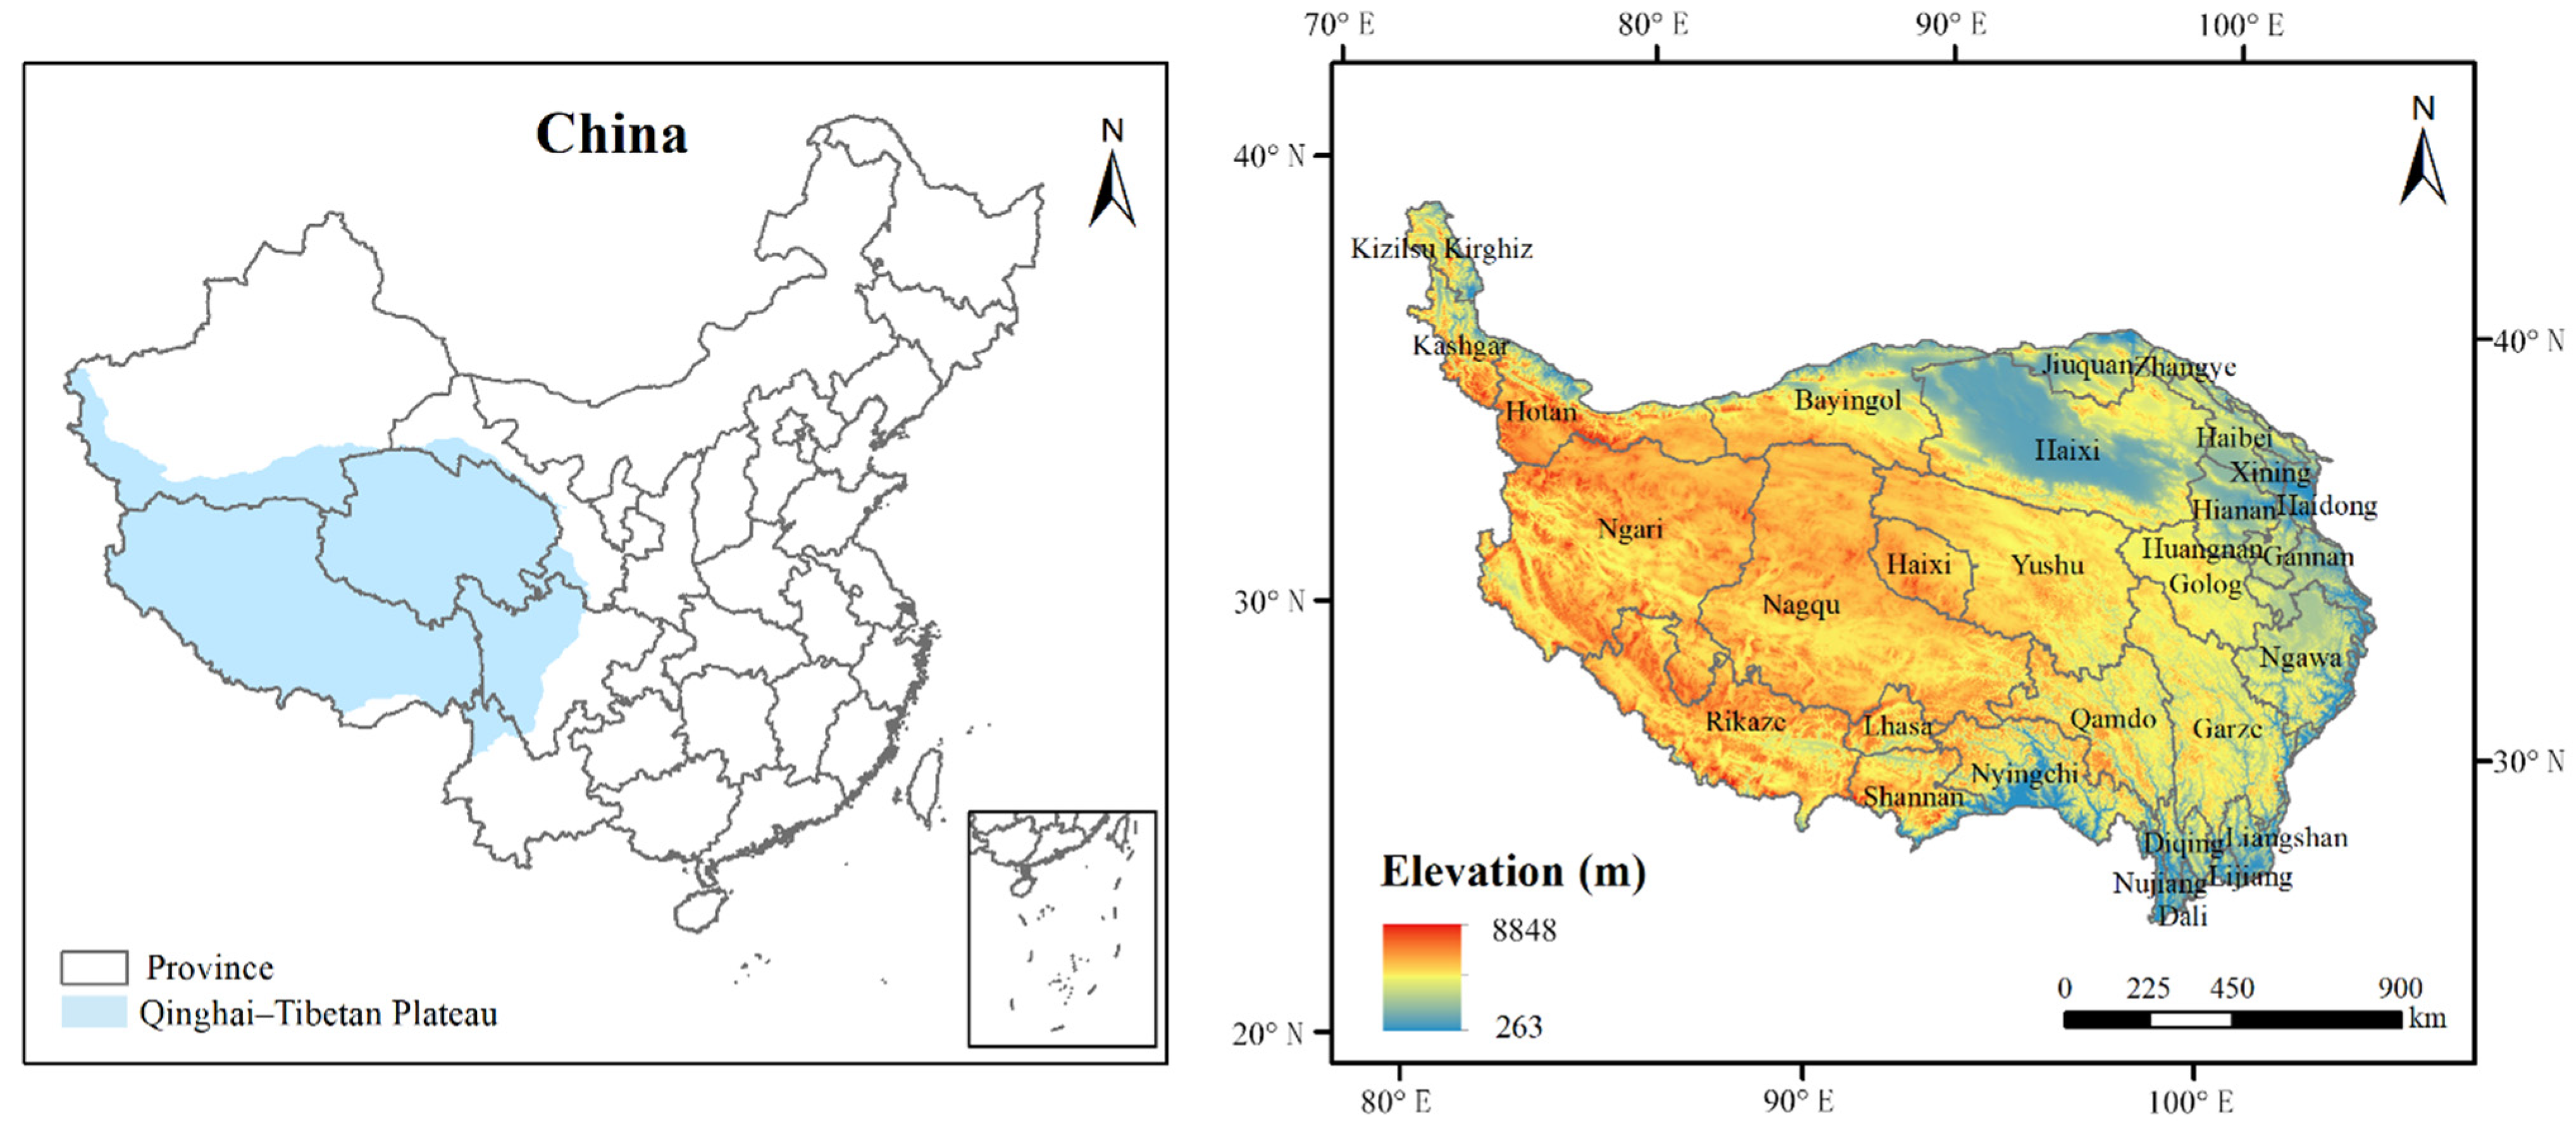 Remote Sensing | Free Full-Text | Landscape Ecological Risk Assessment and  Impact Factor Analysis of the Qinghai&ndash;Tibetan Plateau